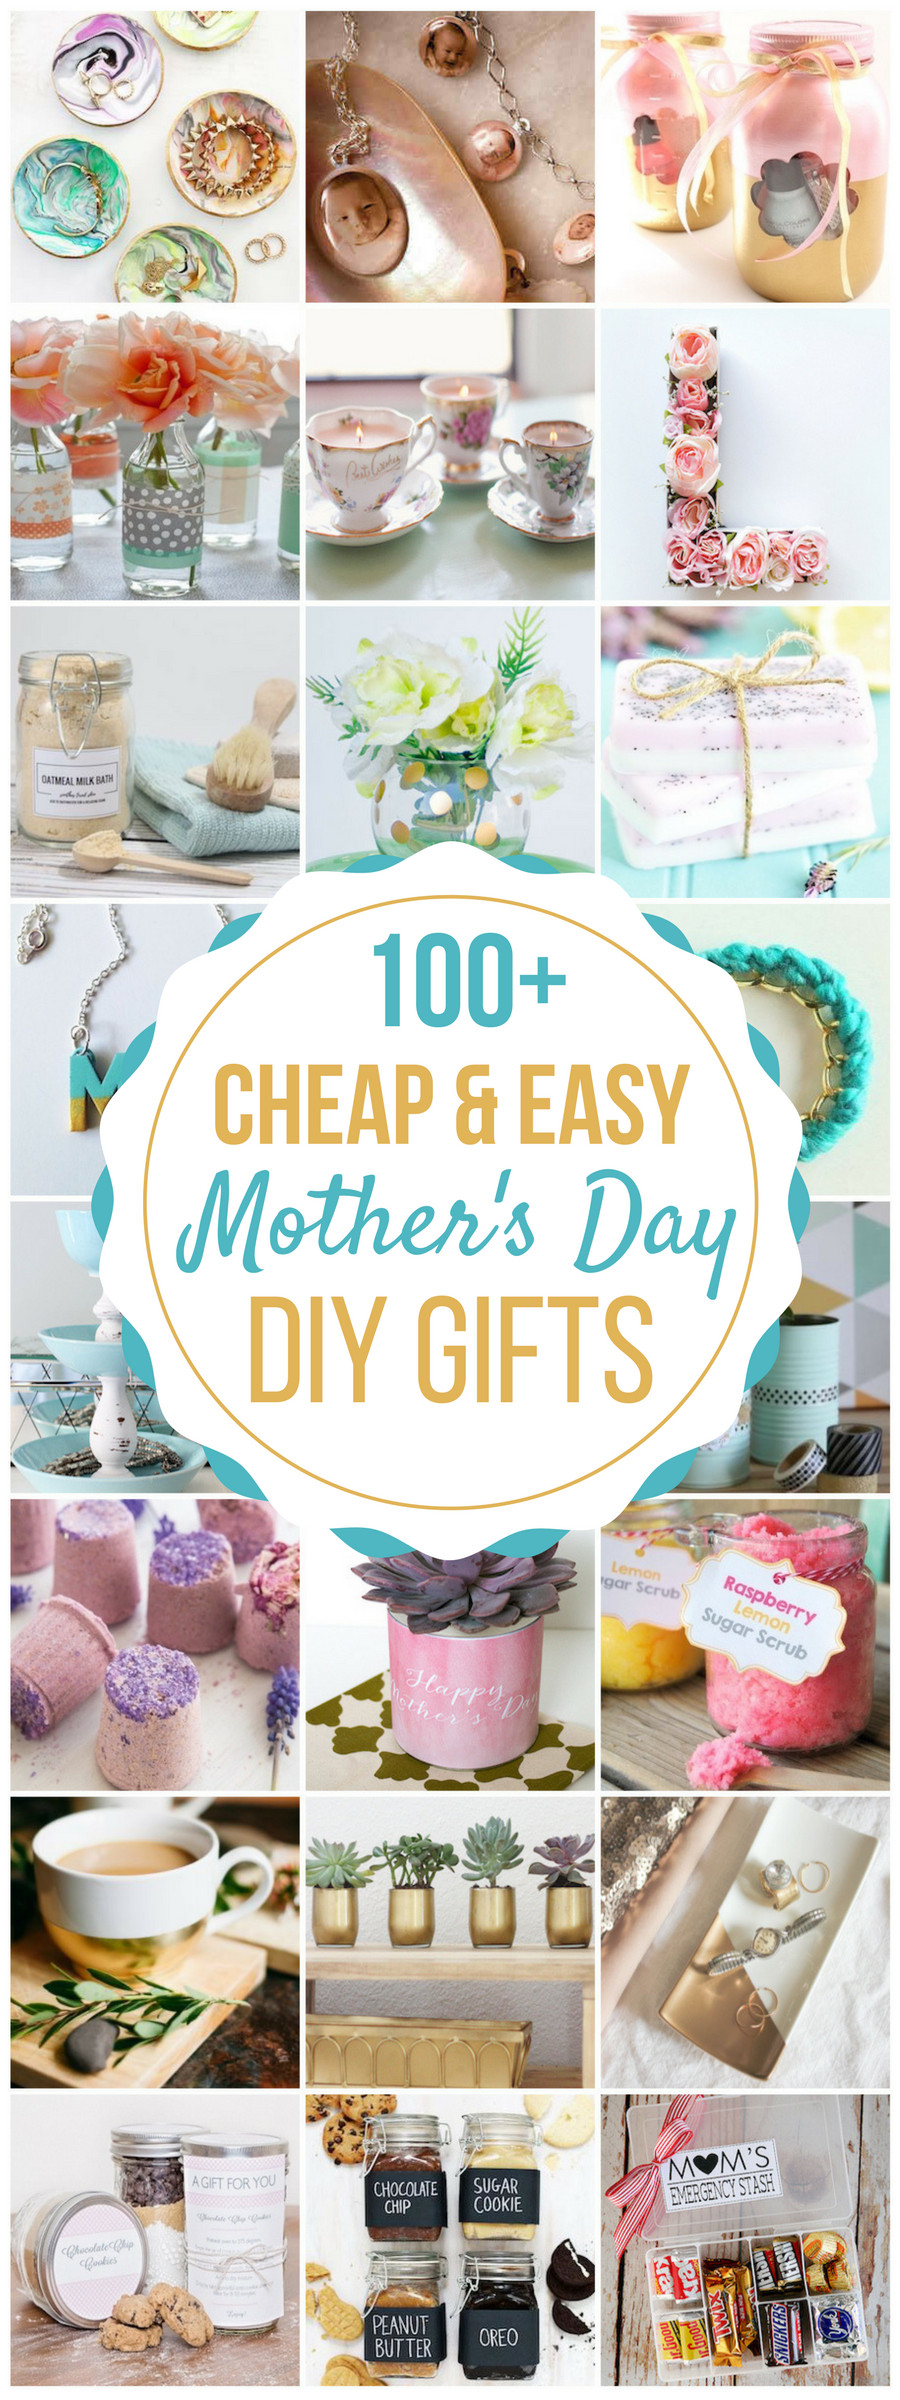 Mothers Day Gift Ideas Pinterest
 100 Cheap & Easy DIY Mother s Day Gifts Prudent Penny